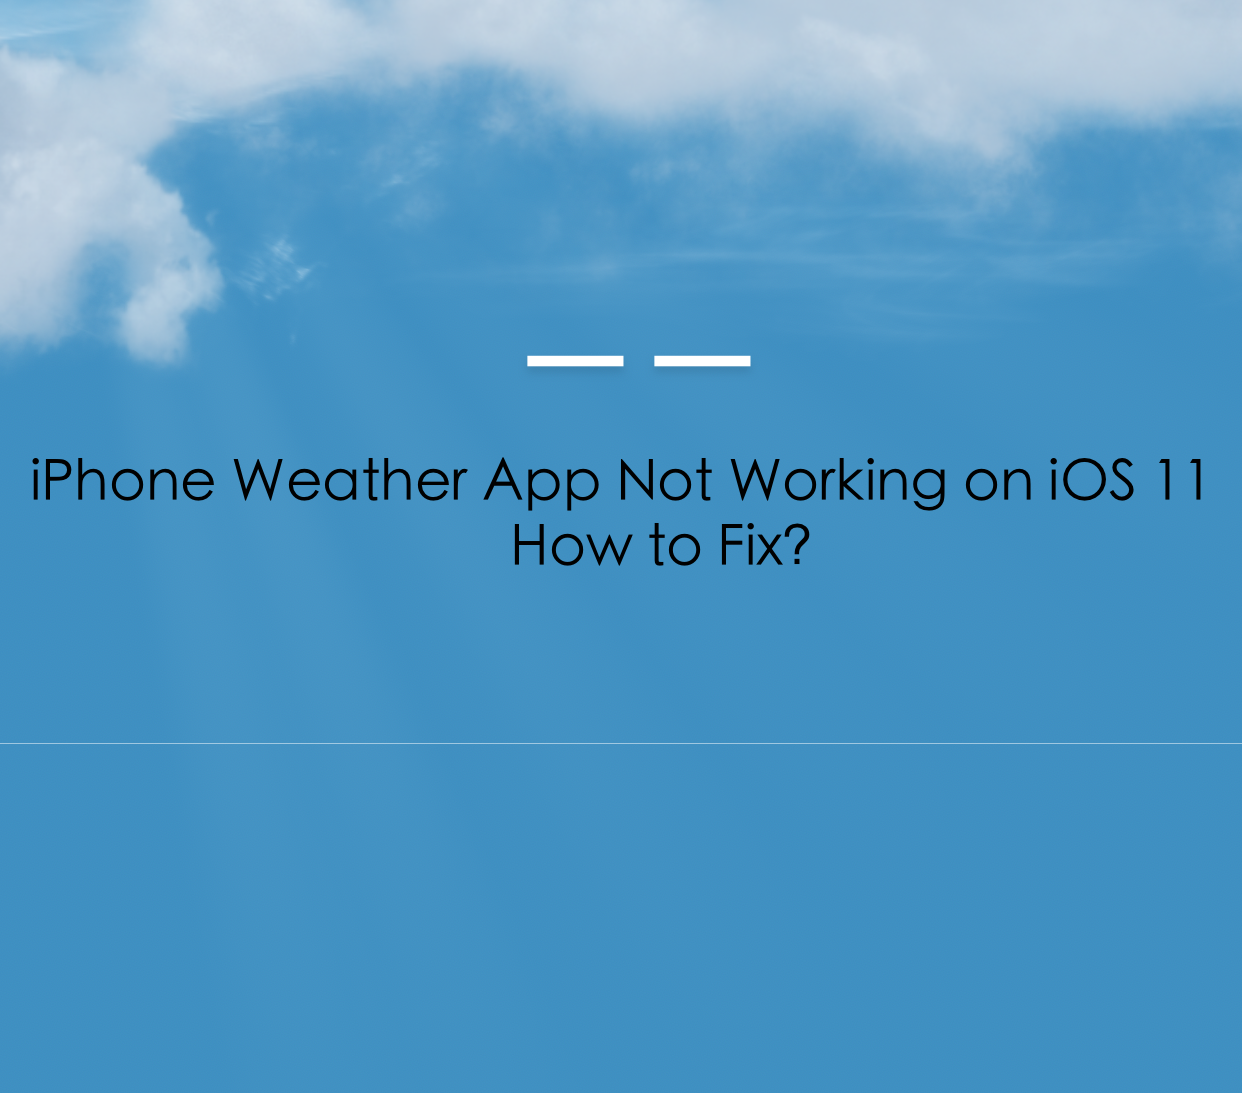 iPhone Weather App Not Working on iOS 11